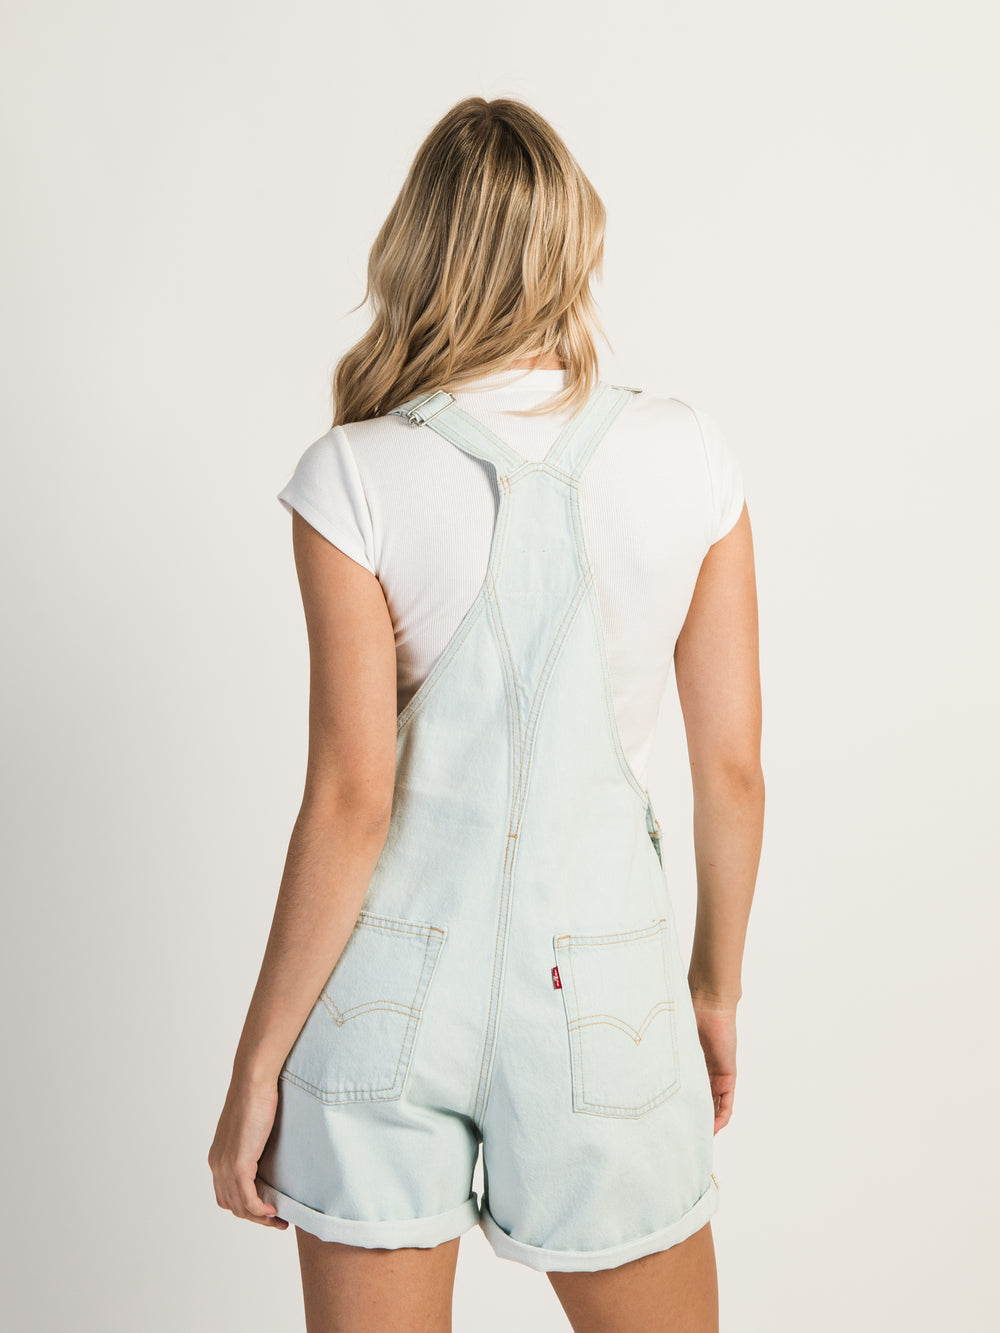 LEVIS VINTAGE SHORTALL - CHANGING EXPECTIONS